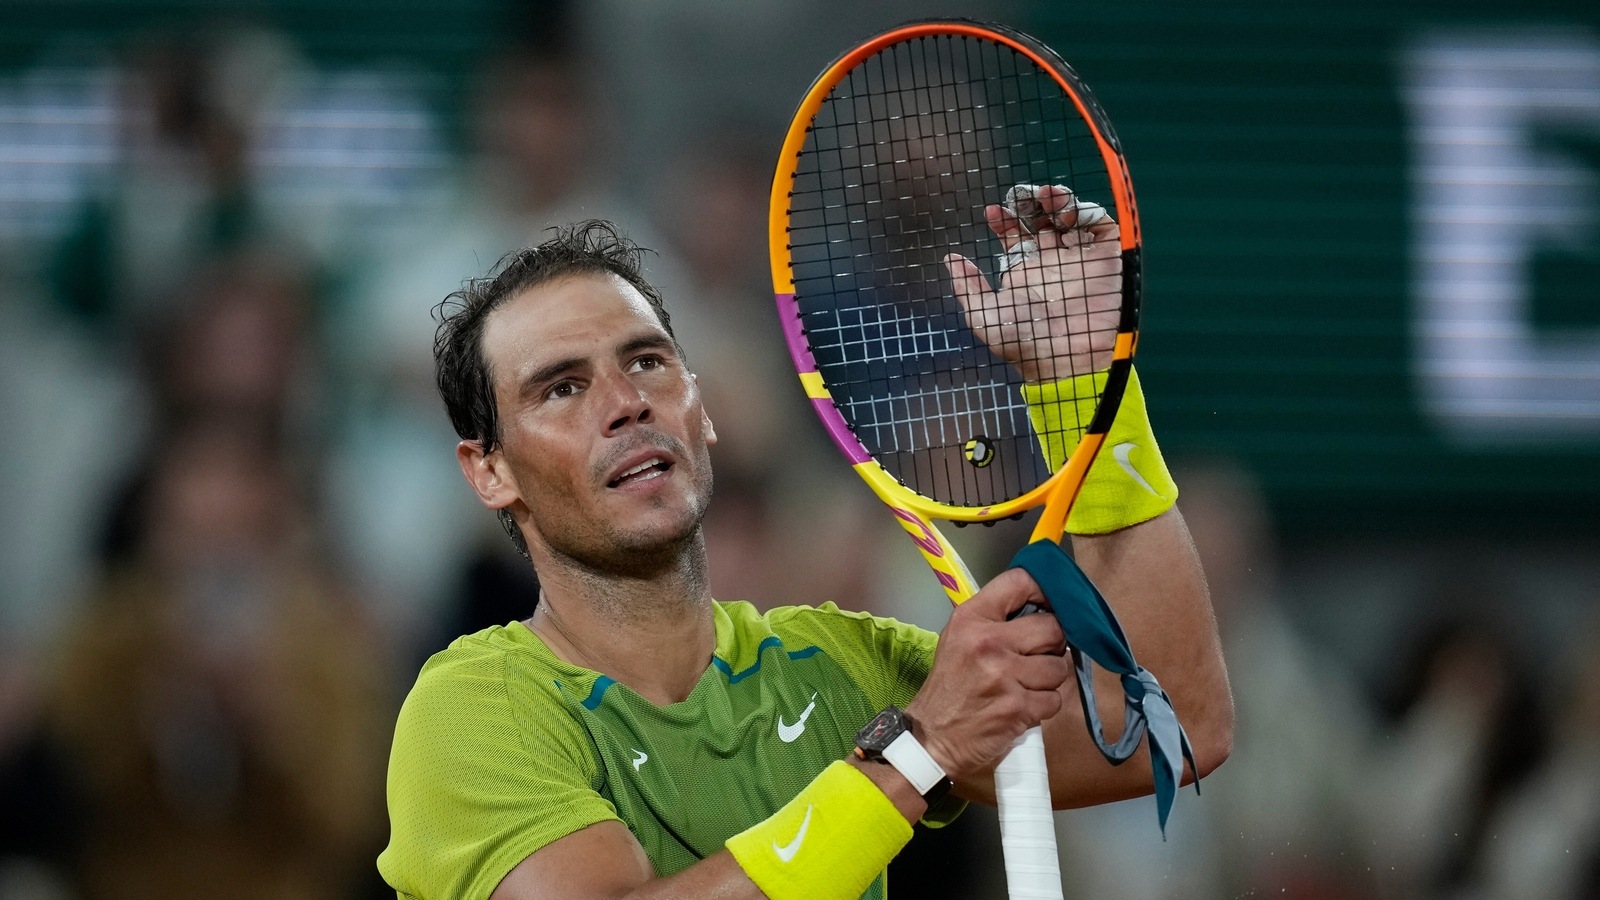 Nadal sails into French Open third round with 300th major win